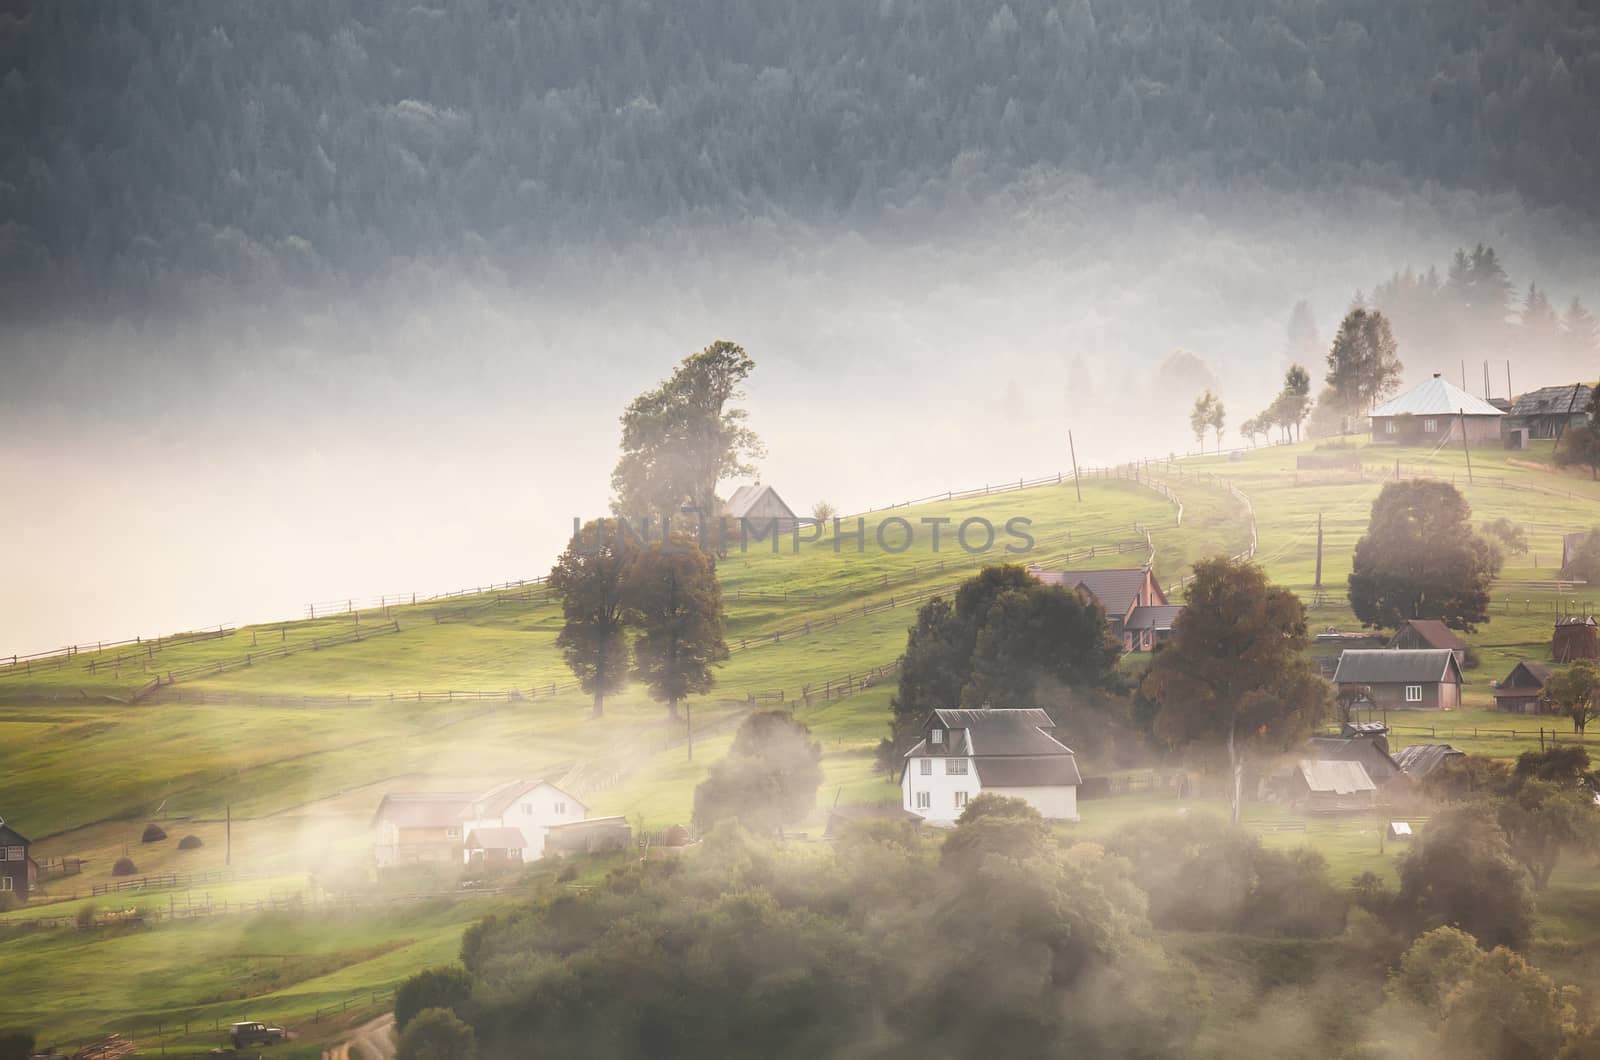 Alpine village in mountains. Smoke, bonfire and haze over the hills in Carpathians.